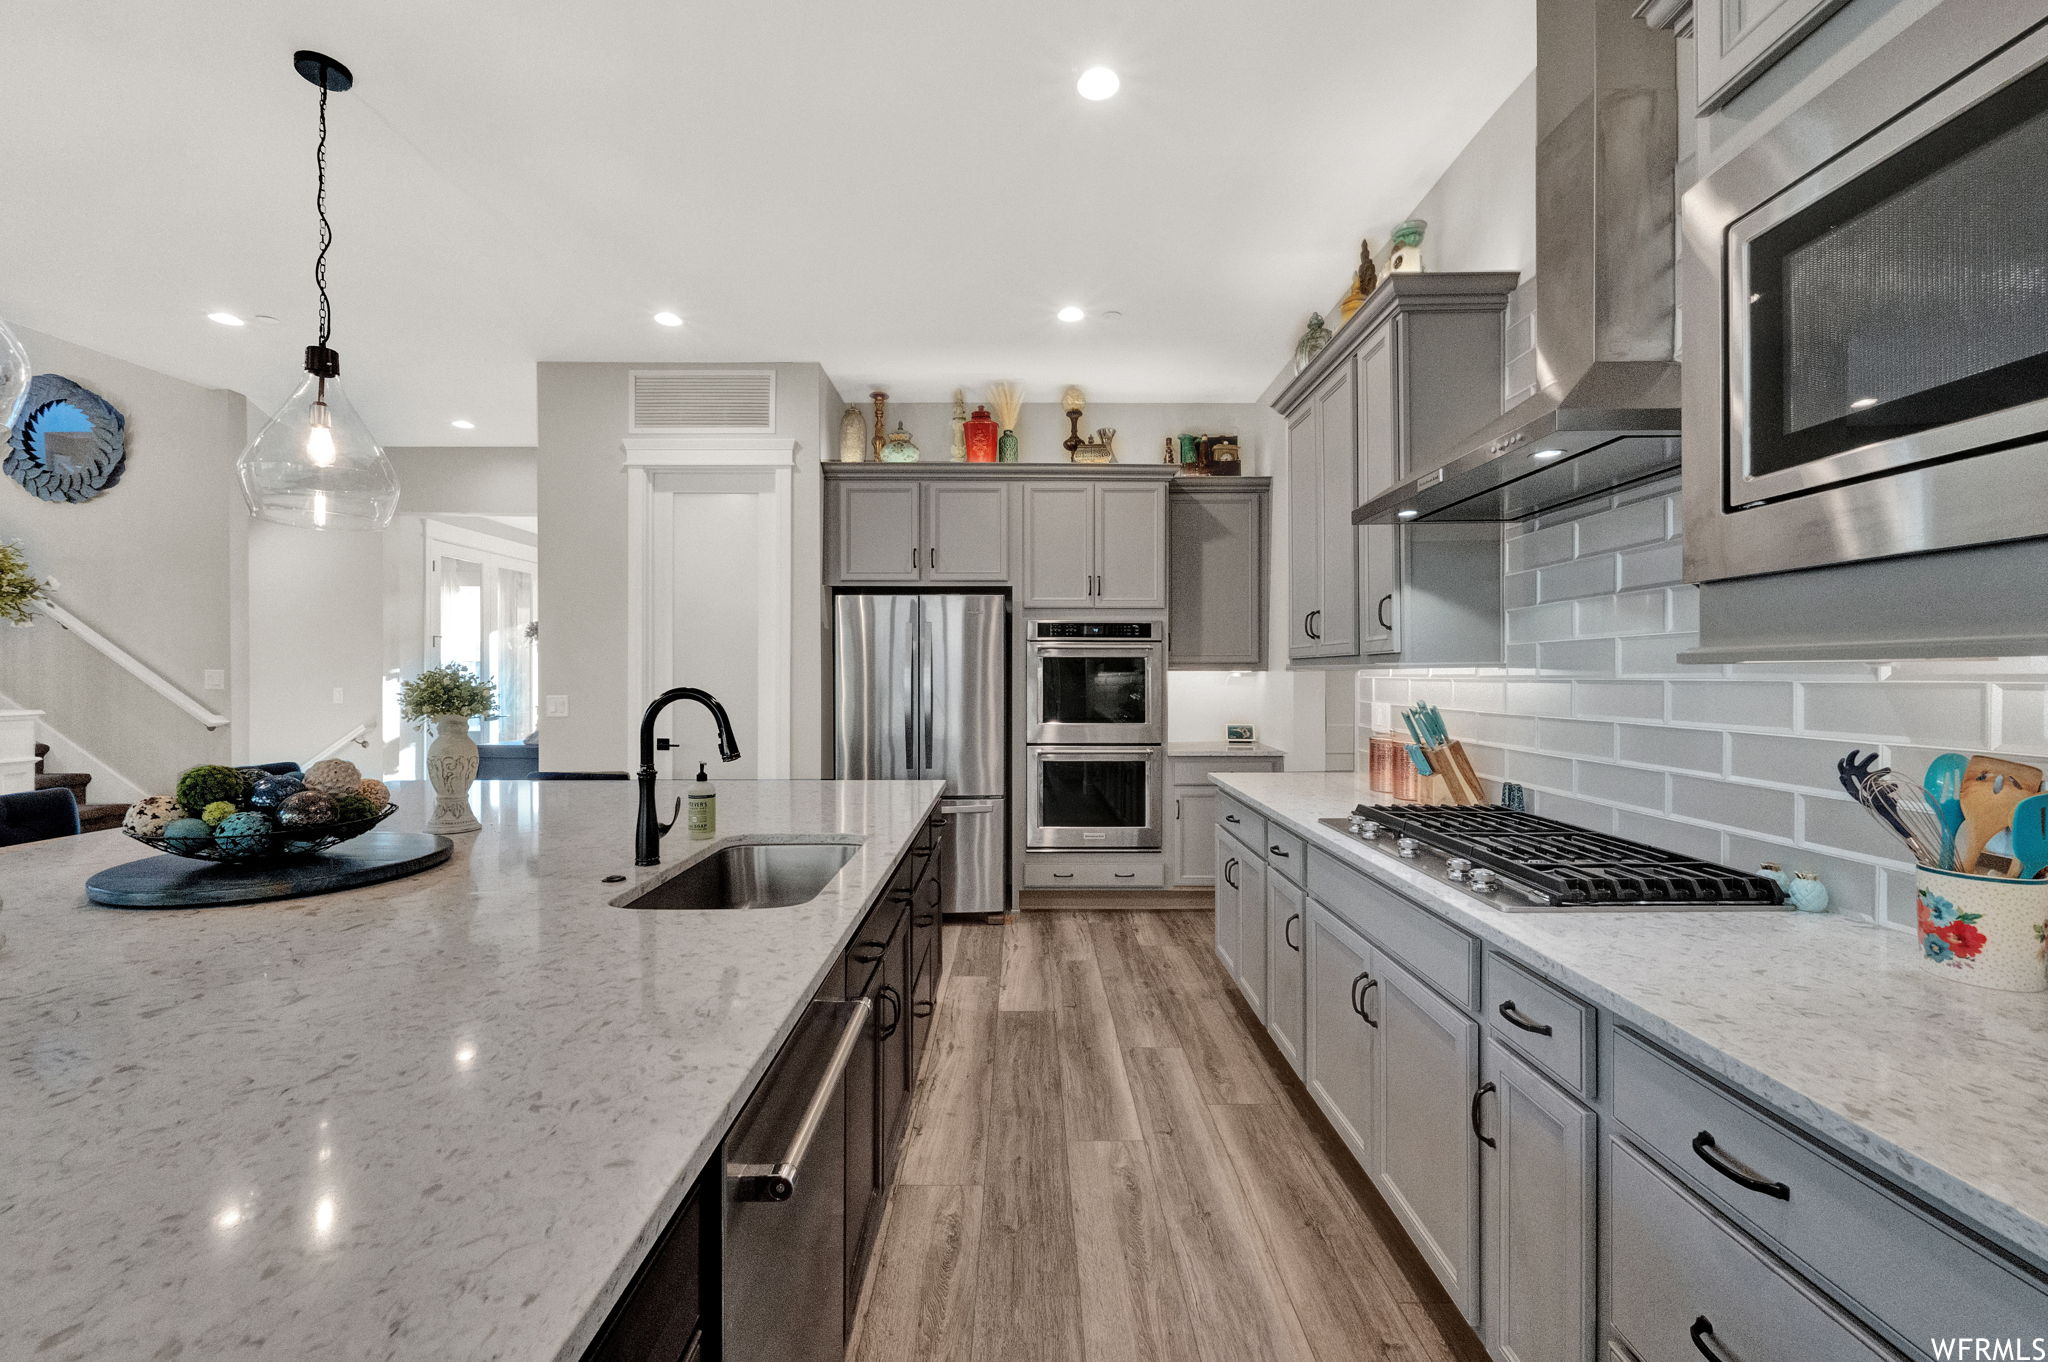 Kitchen with stainless steel appliances, wall chimney range hood, decorative light fixtures, wood-type flooring, white cabinets, backsplash, and light granite-like countertops